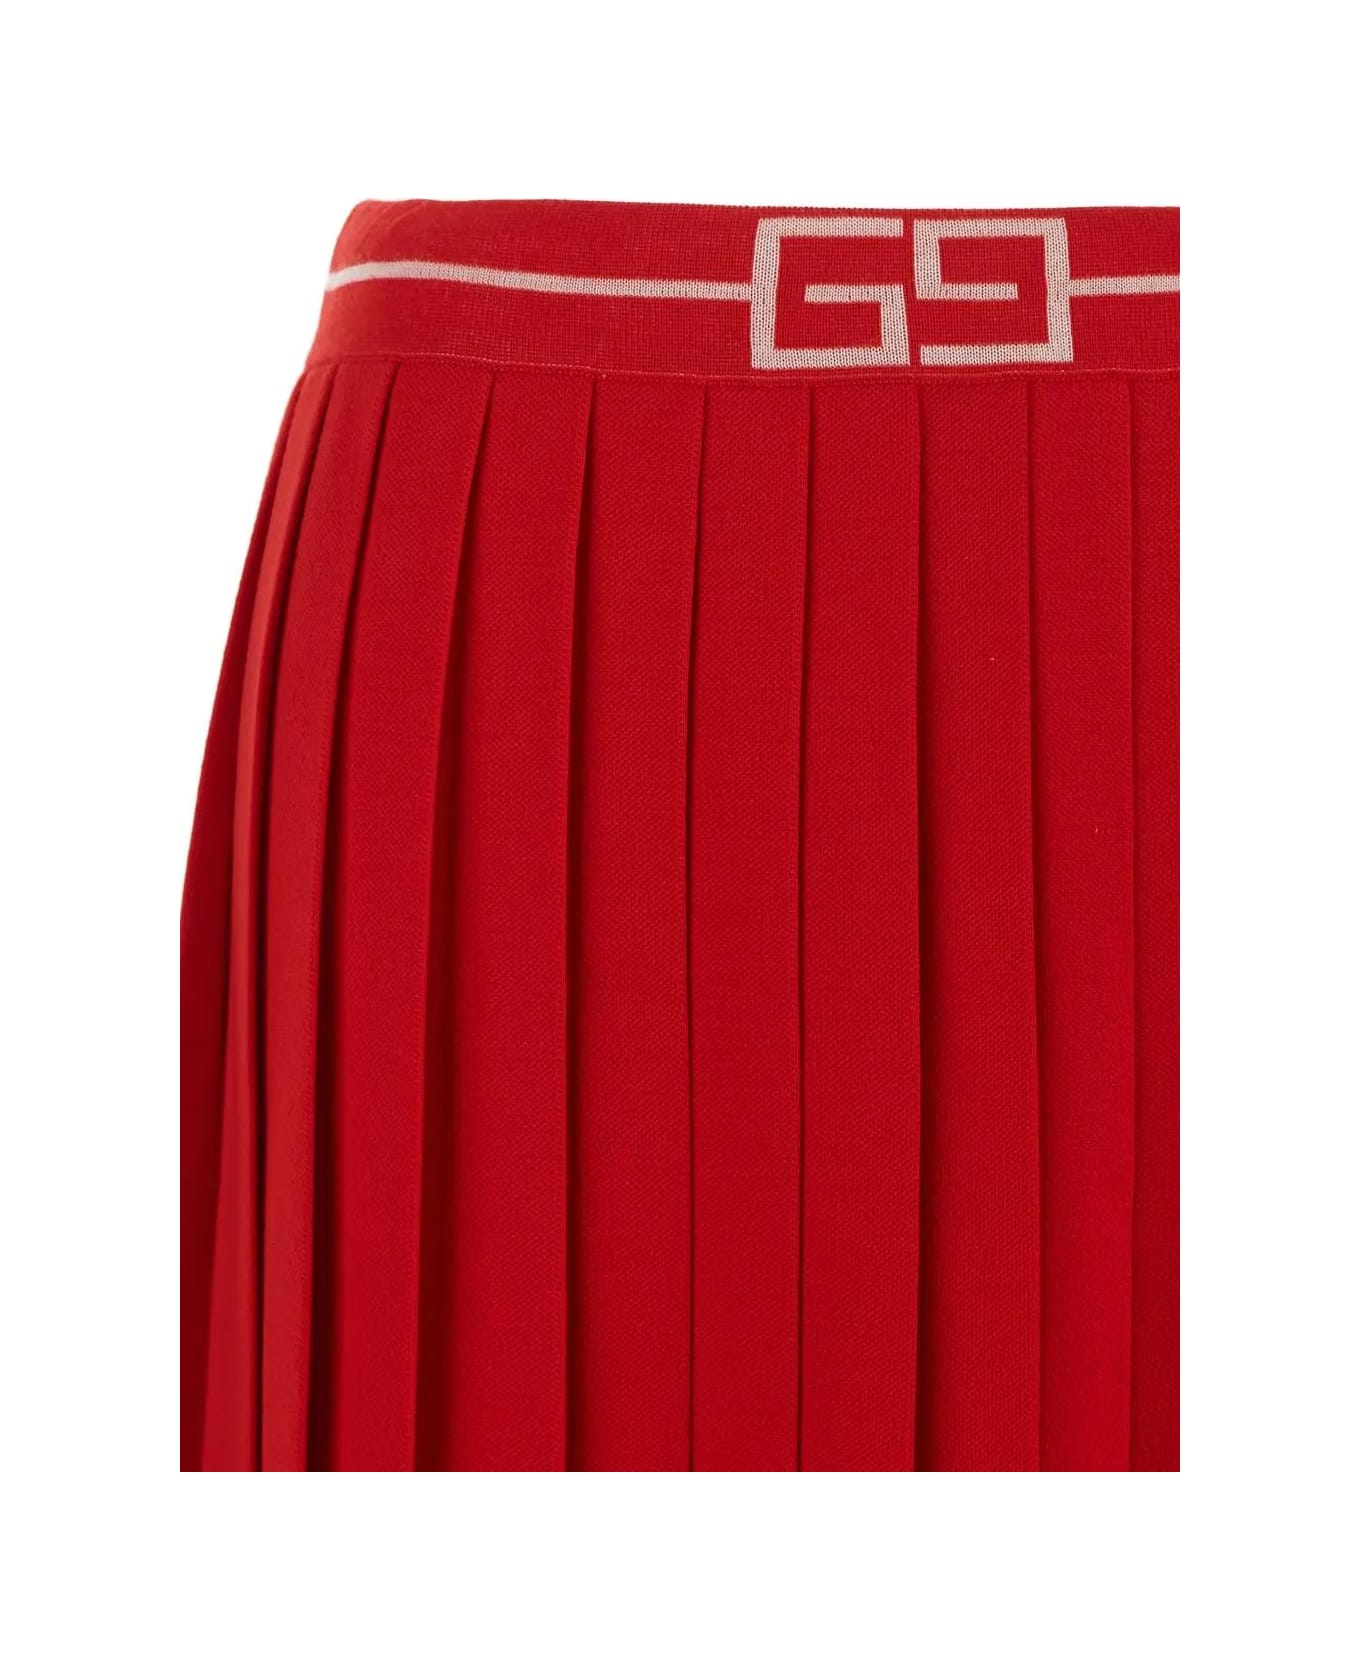 Gucci Pleated Wool Skirt - Red